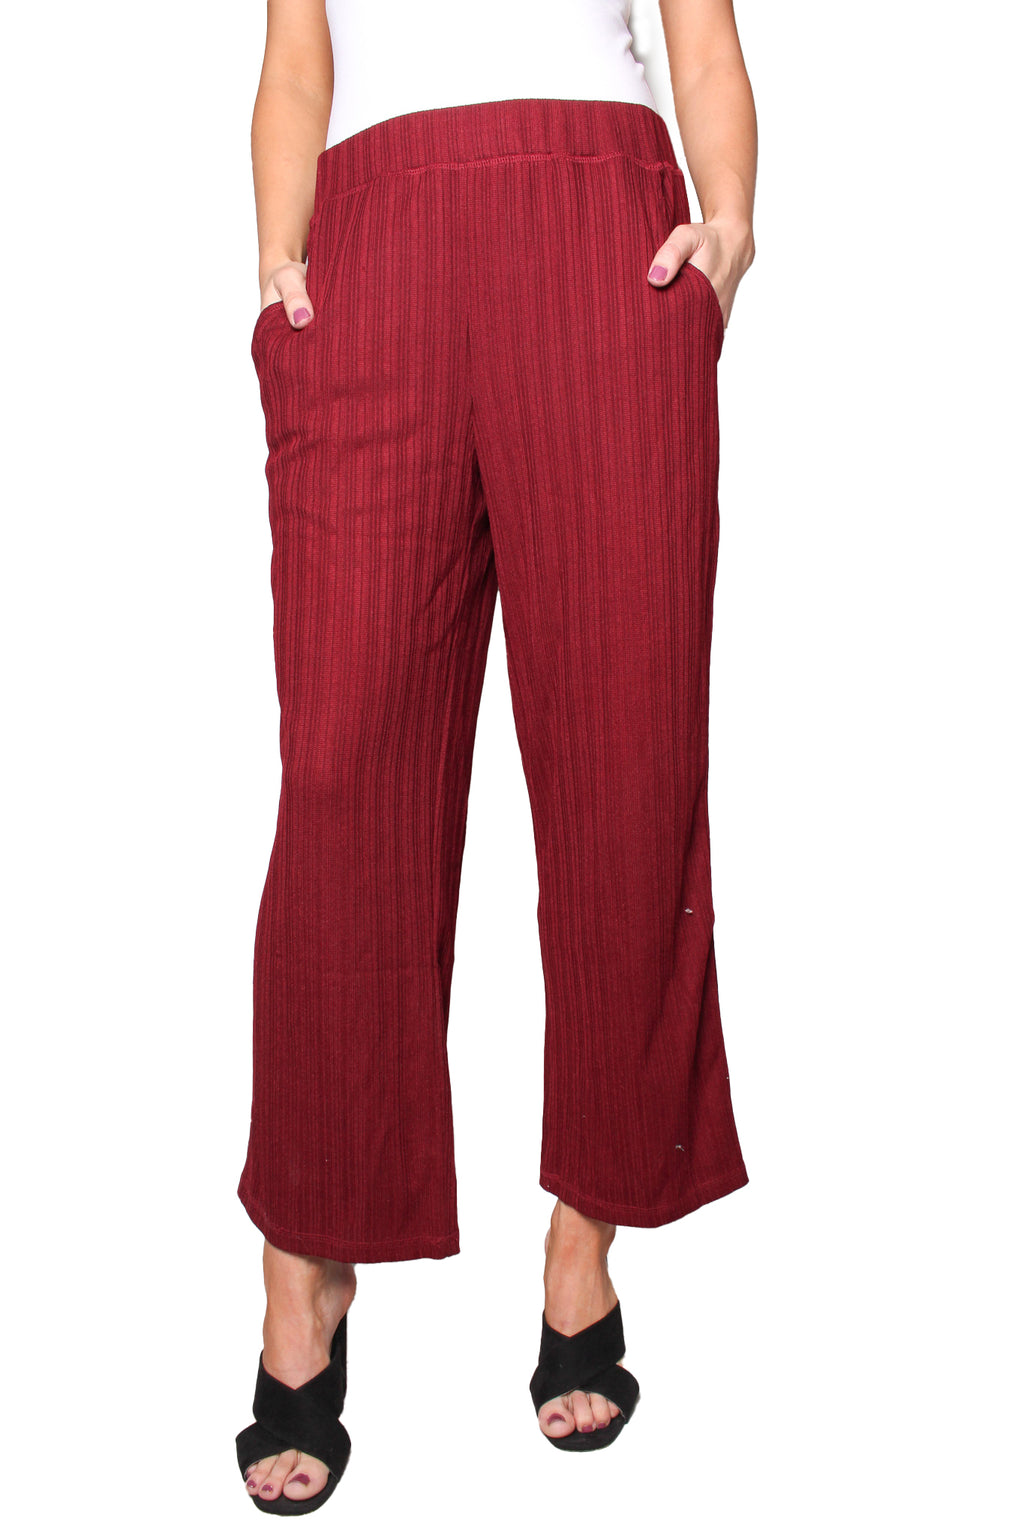 Women's Waisted Solid Knitted Pants